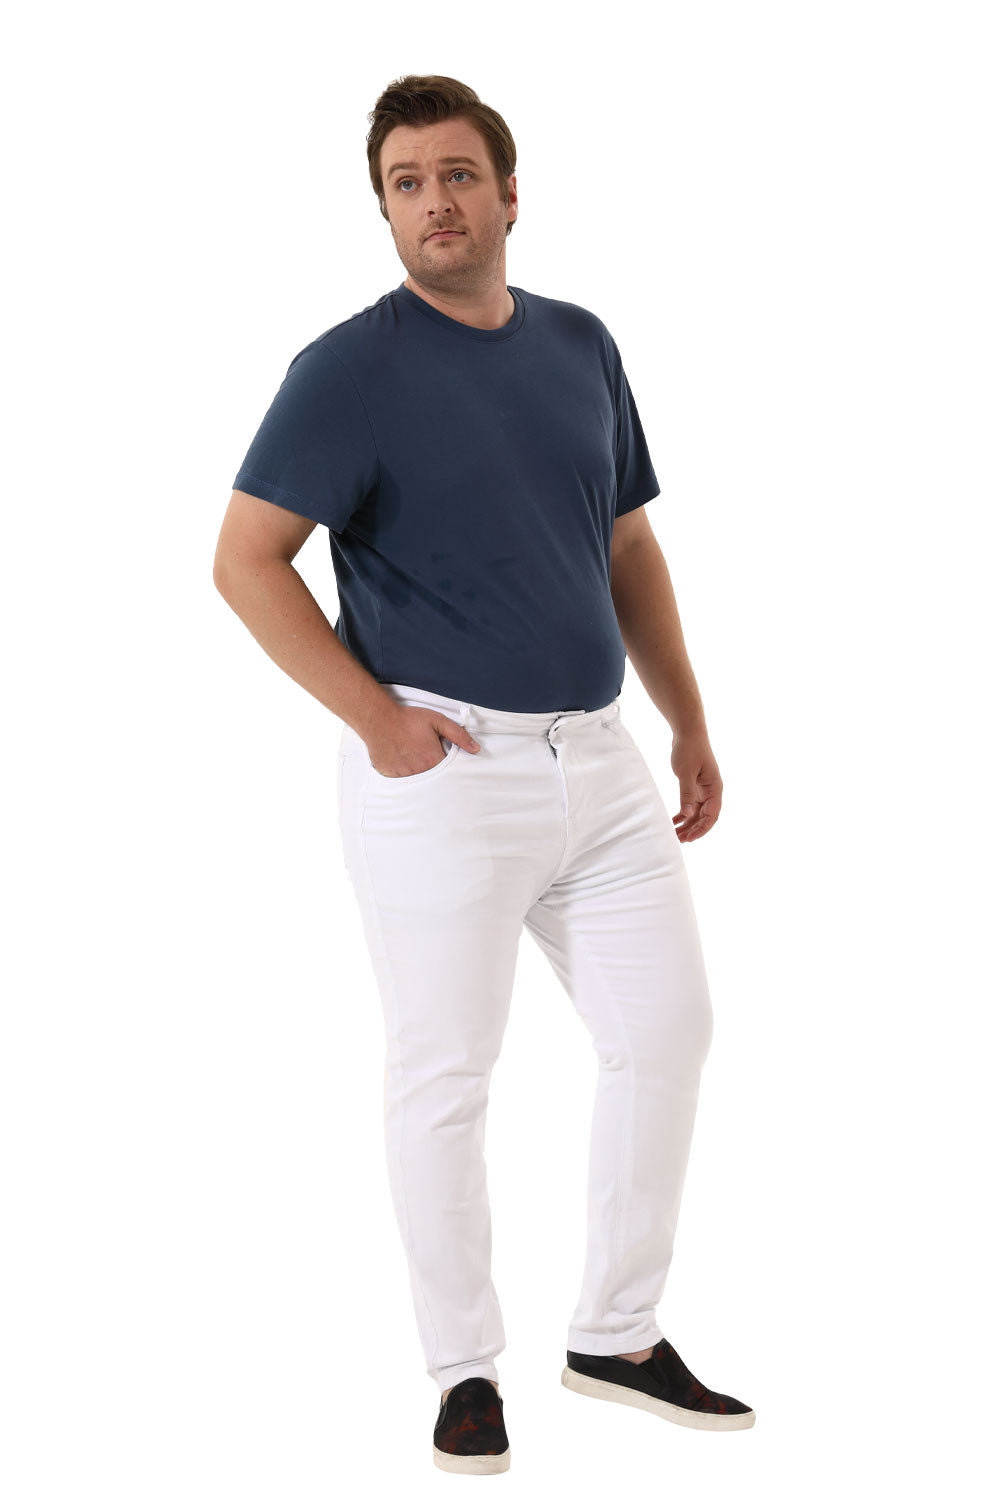 Mens White Jeans Ripped Stretch Jeans(B&T)